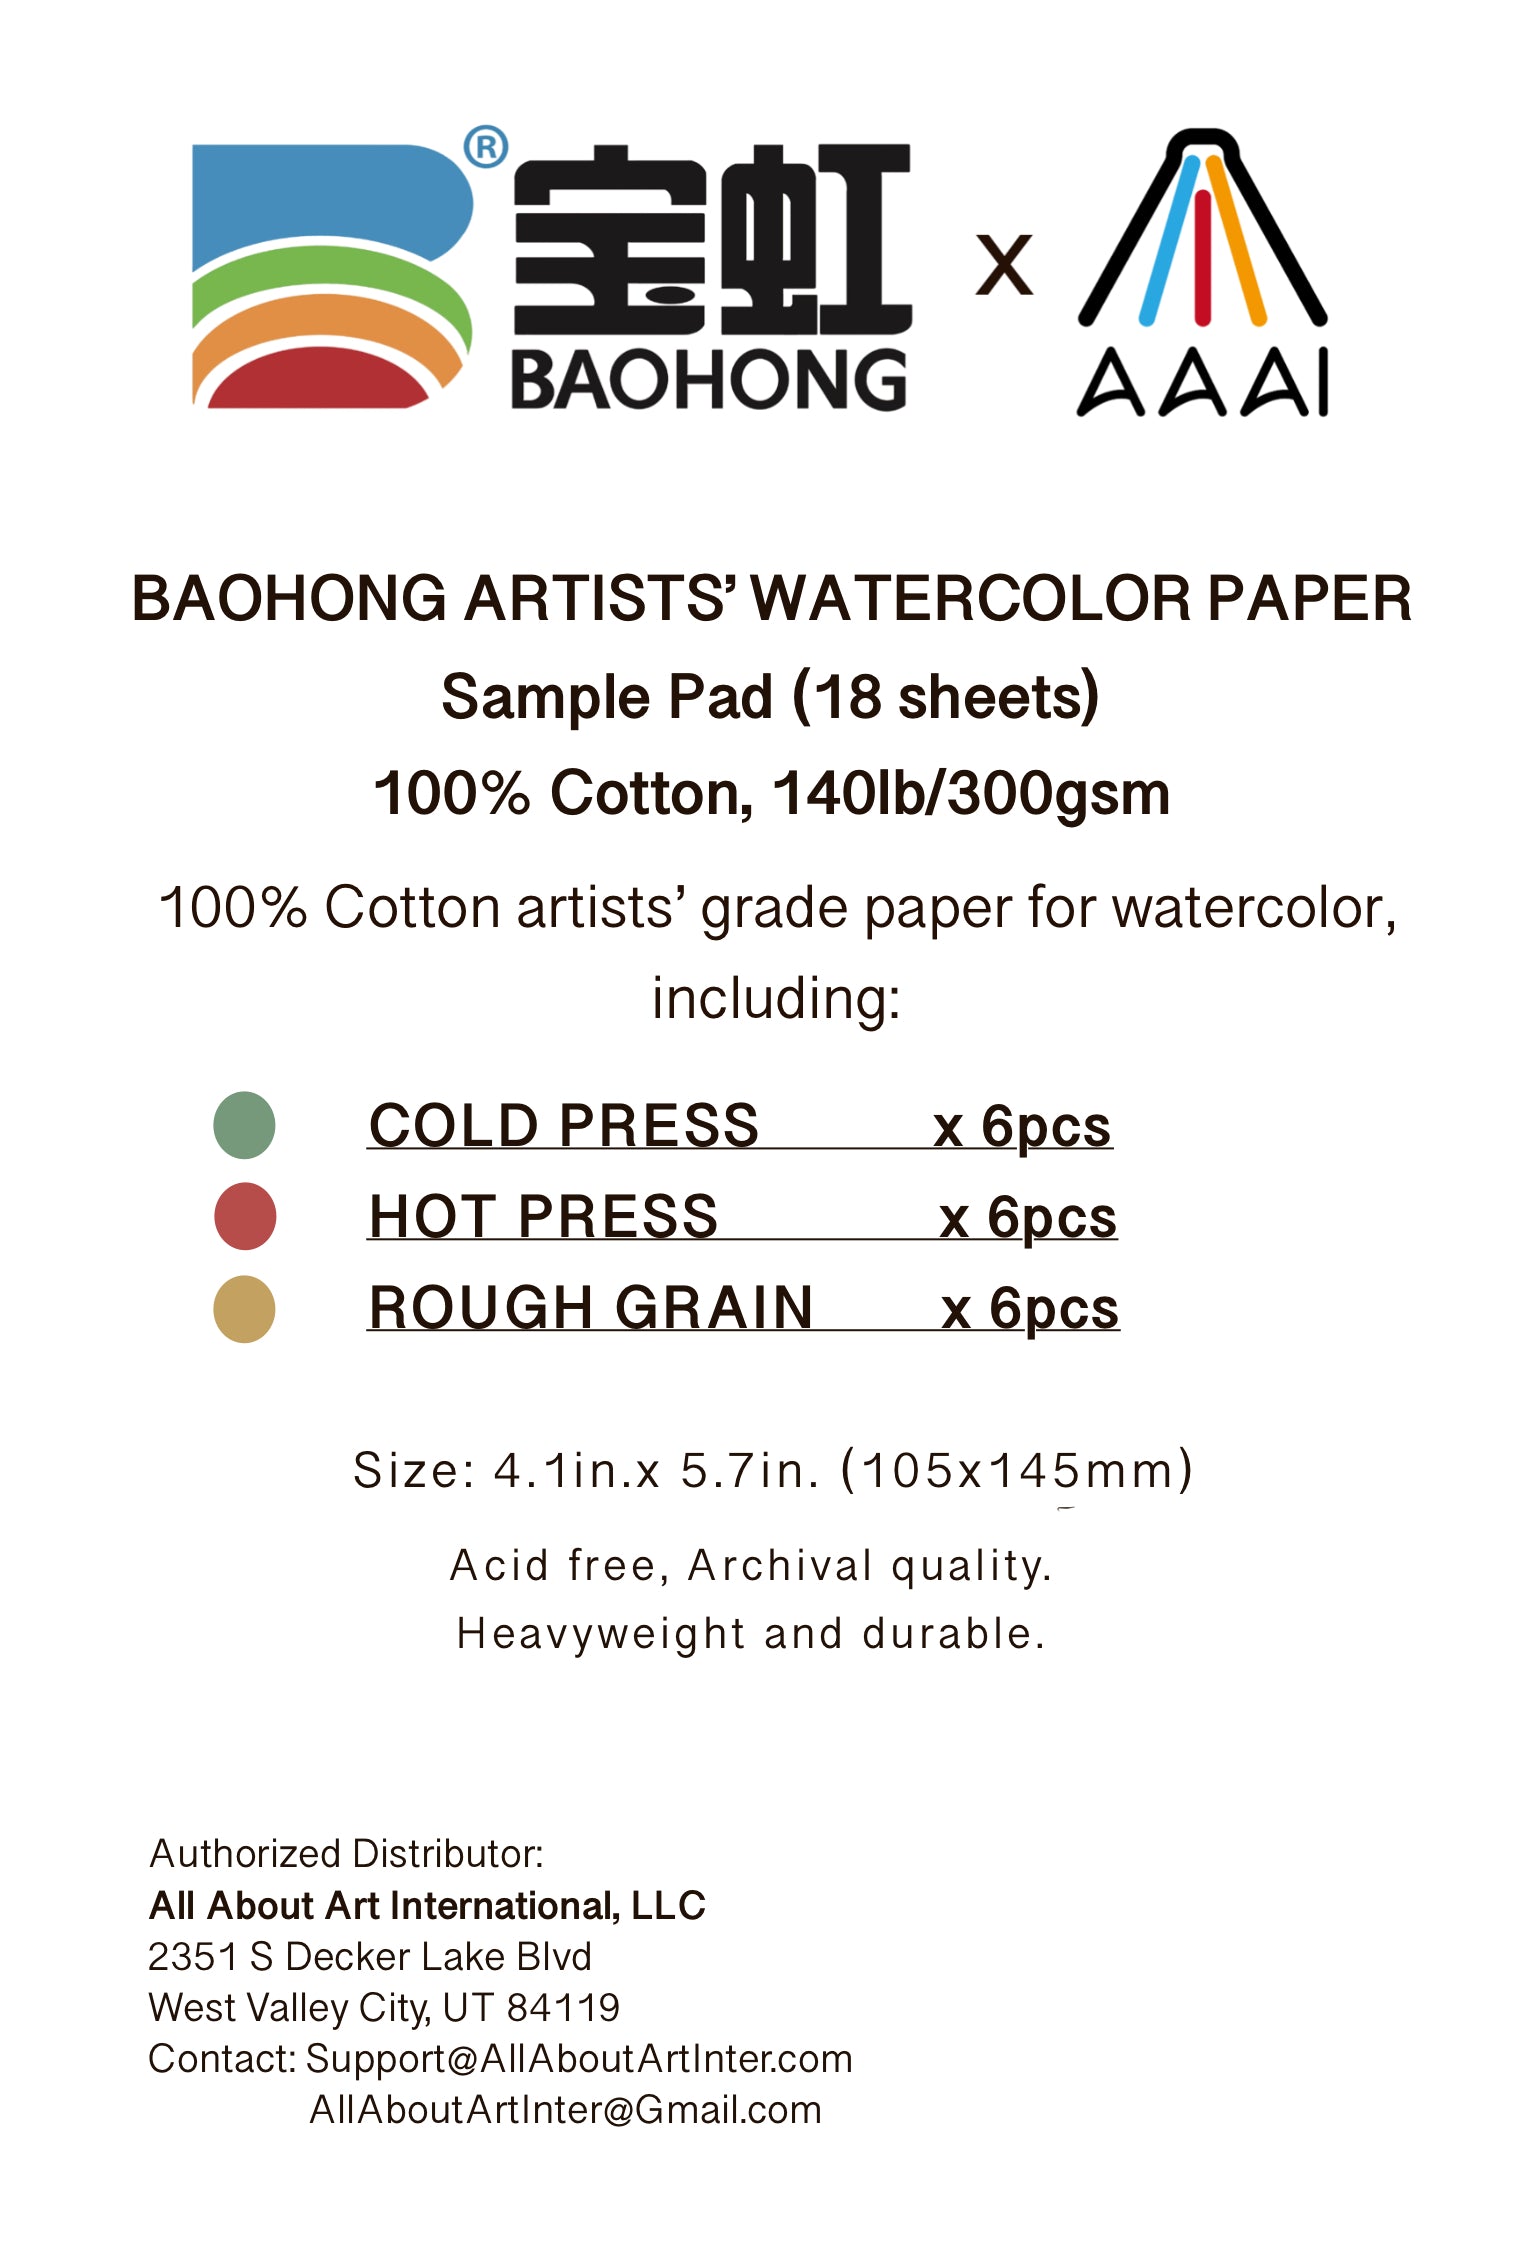 Baohong Artists' Watercolor Painting Block, Pack of 2, 40 Sheets 100% Cotton, Acid-free, 140lb/300gsm, Cold Press Textured, Ideal for Watercolor